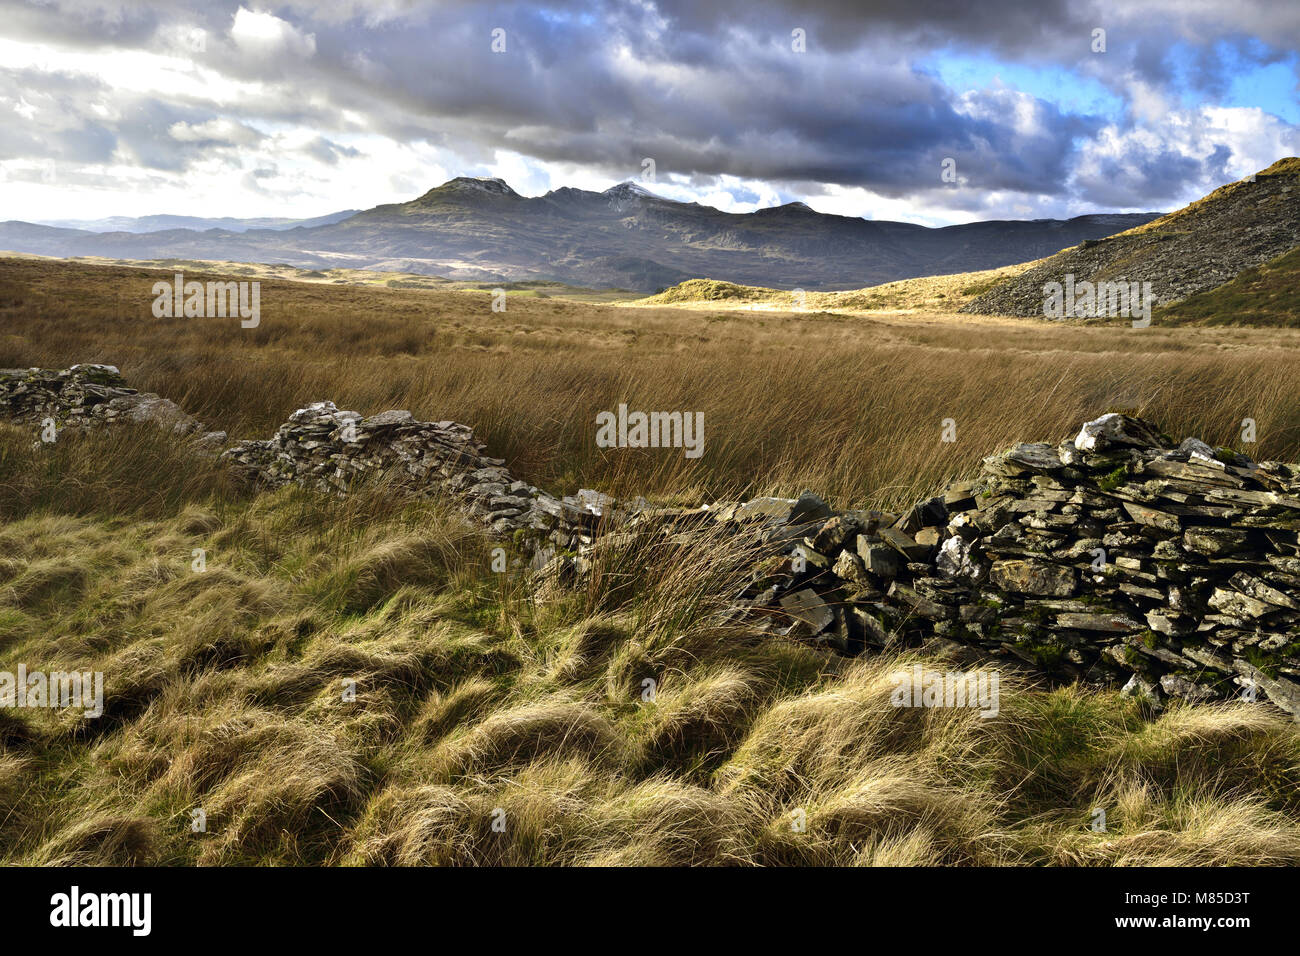 A winter view across moorland of the Snowdonia Mountains in North Wales, UK. Stock Photo